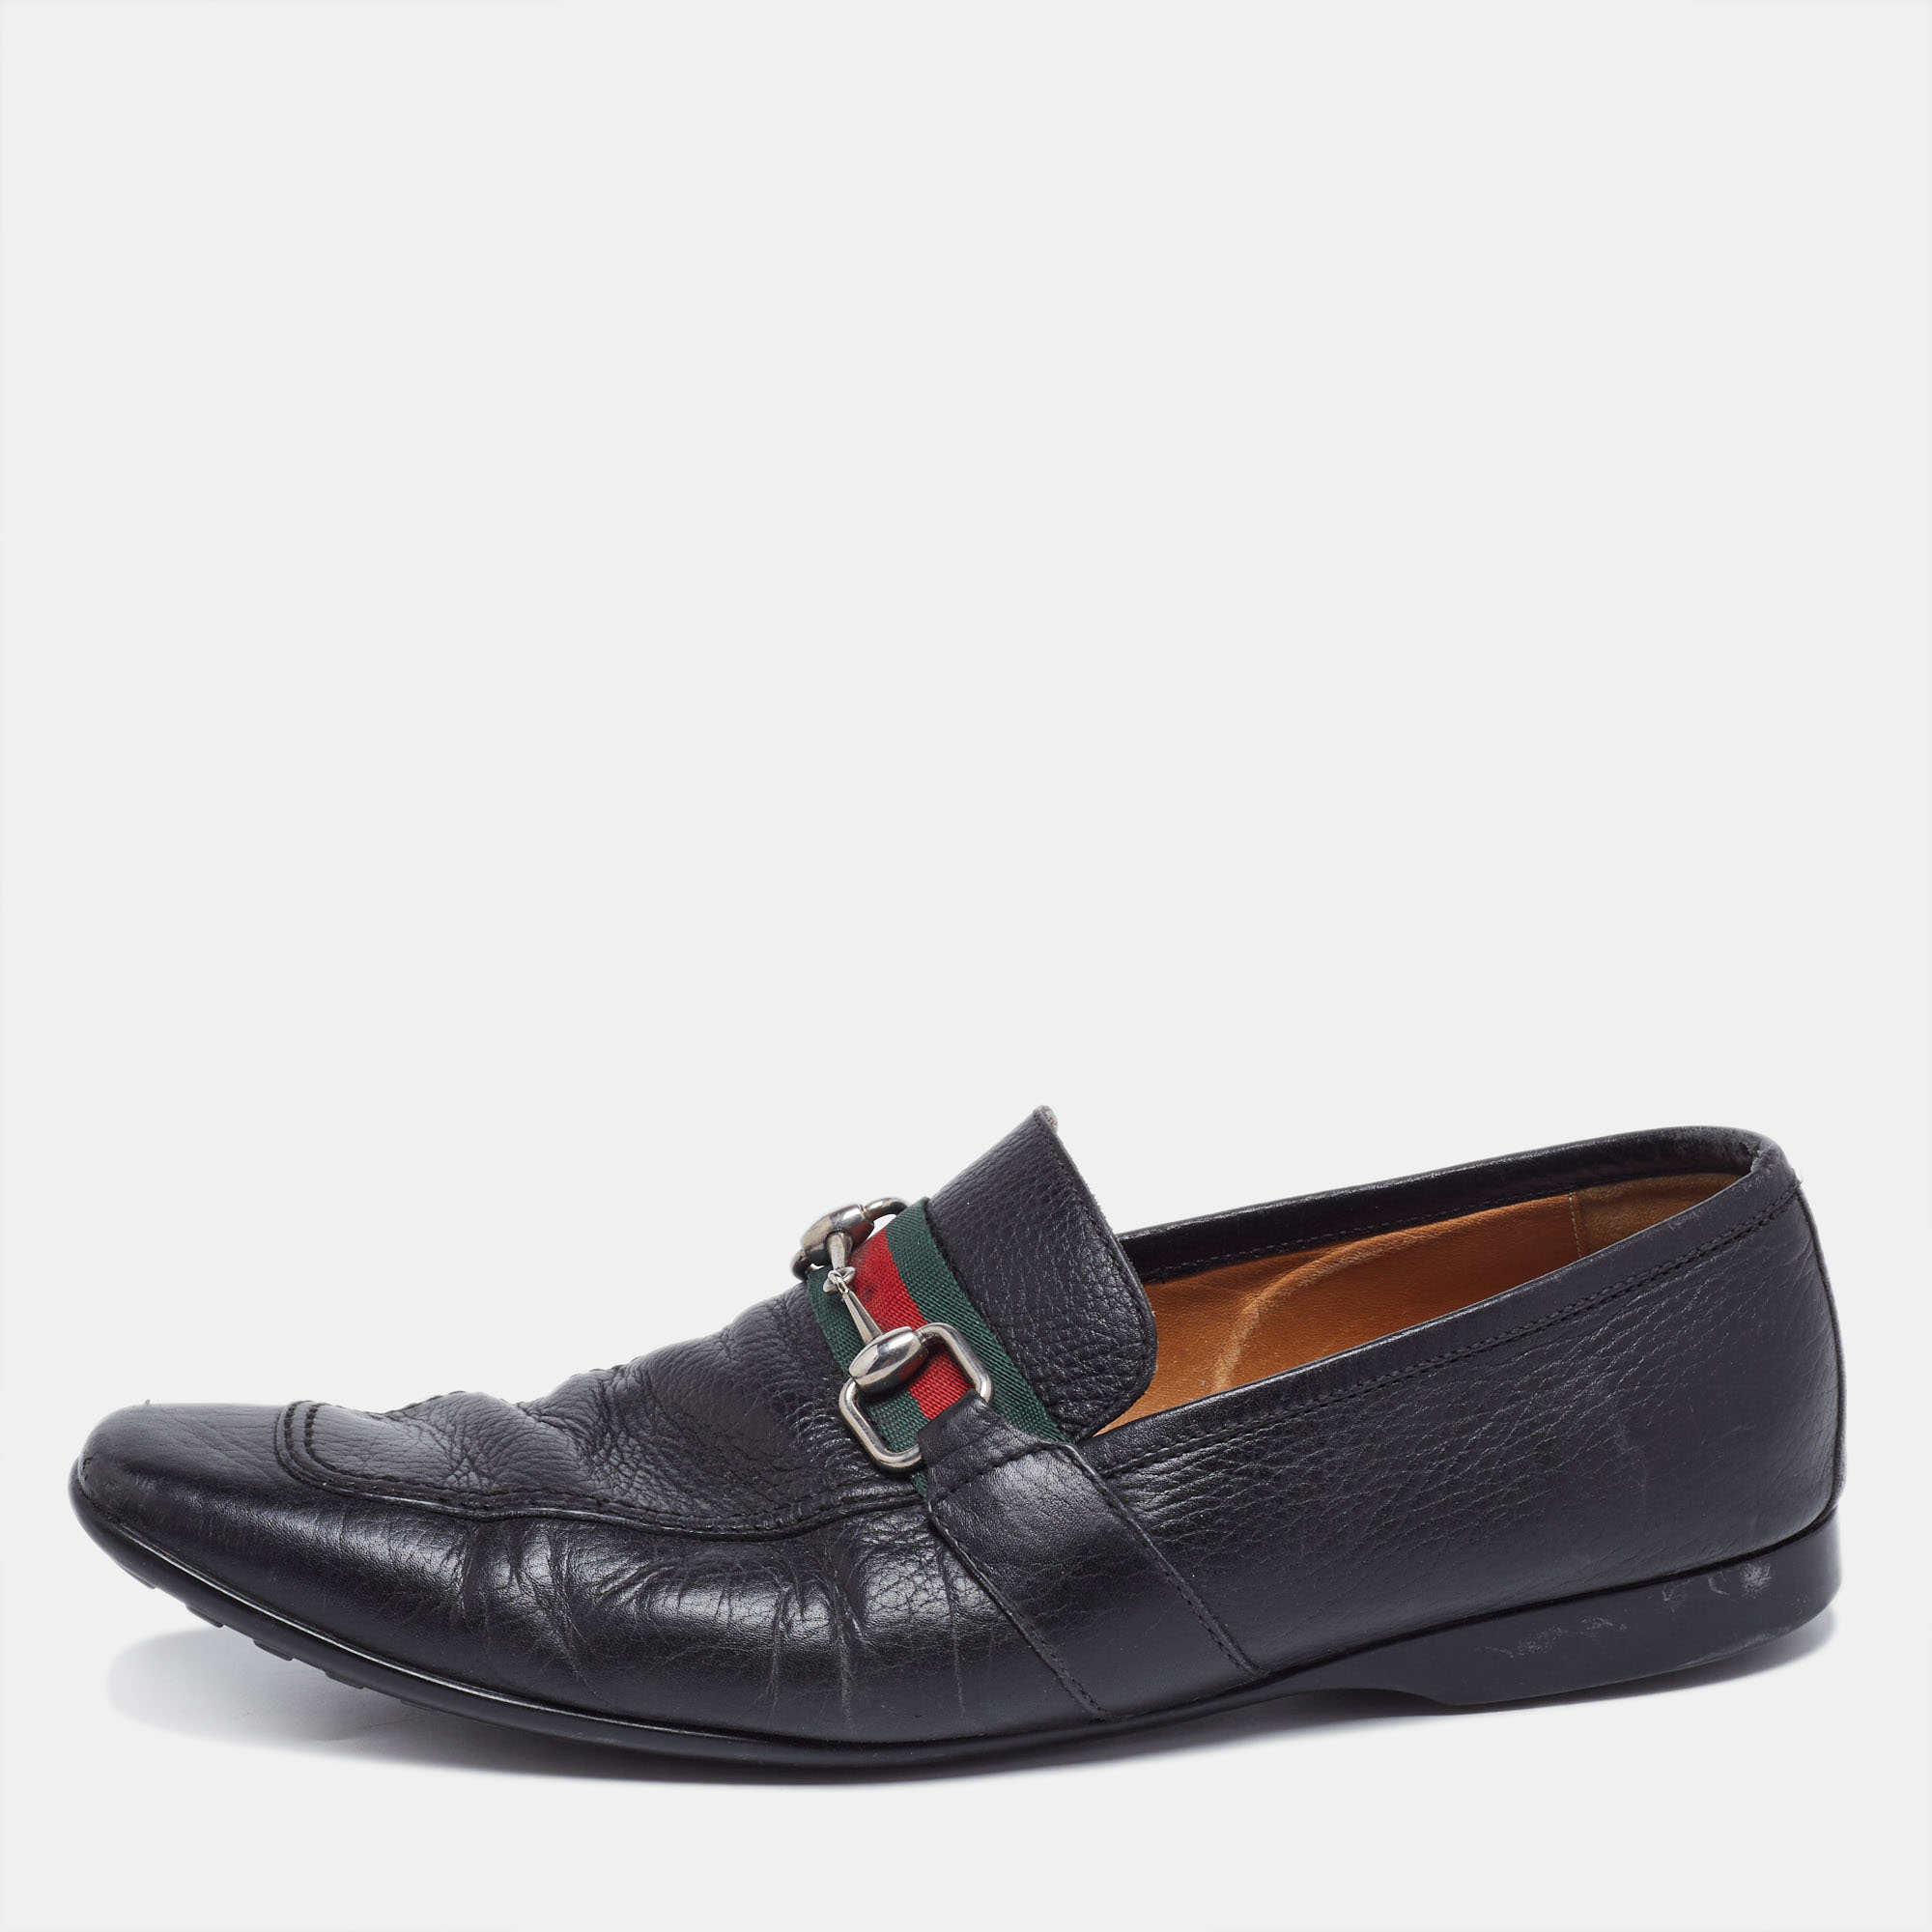 Gucci black leather horsebit web detail slip on loafers size 44.5